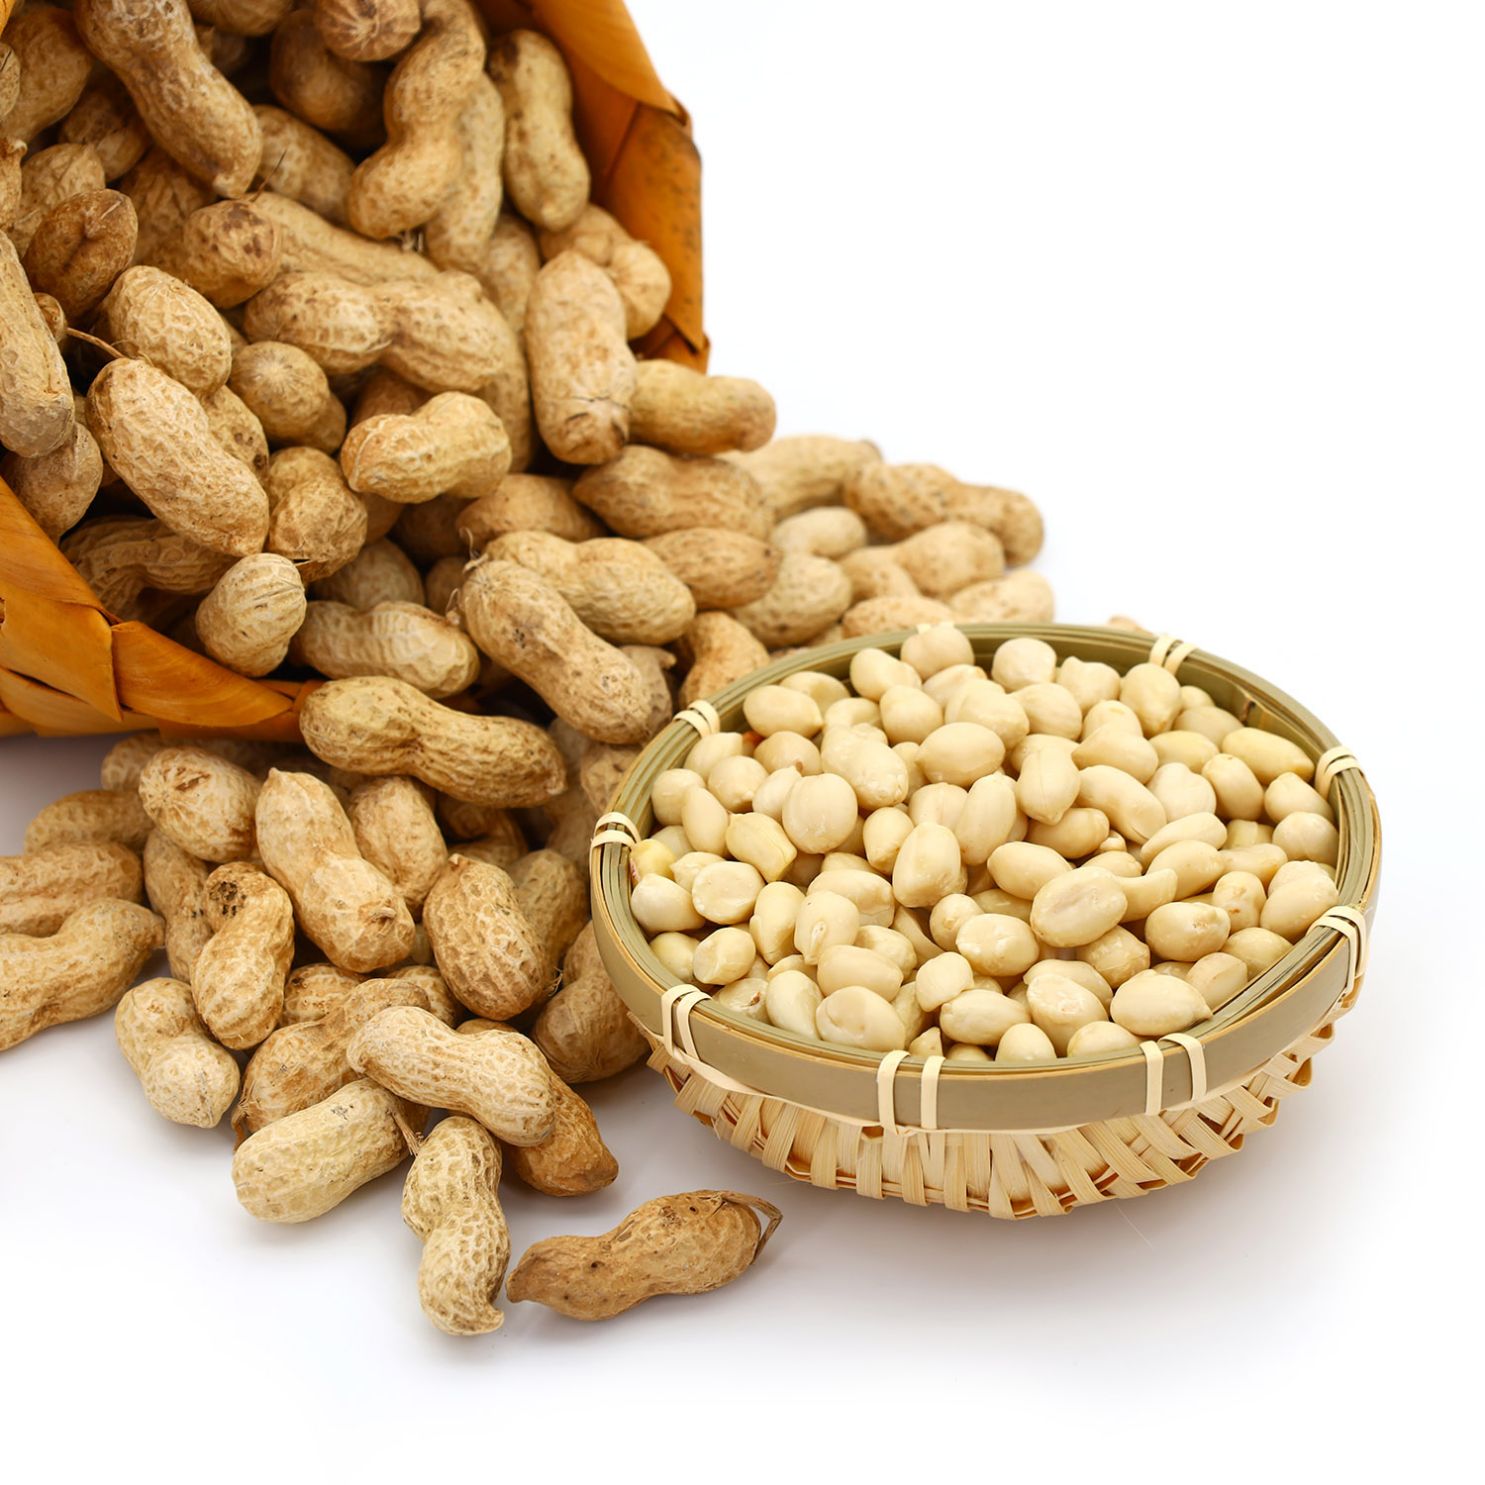 Is it related to the spread of peanut cancer cells?